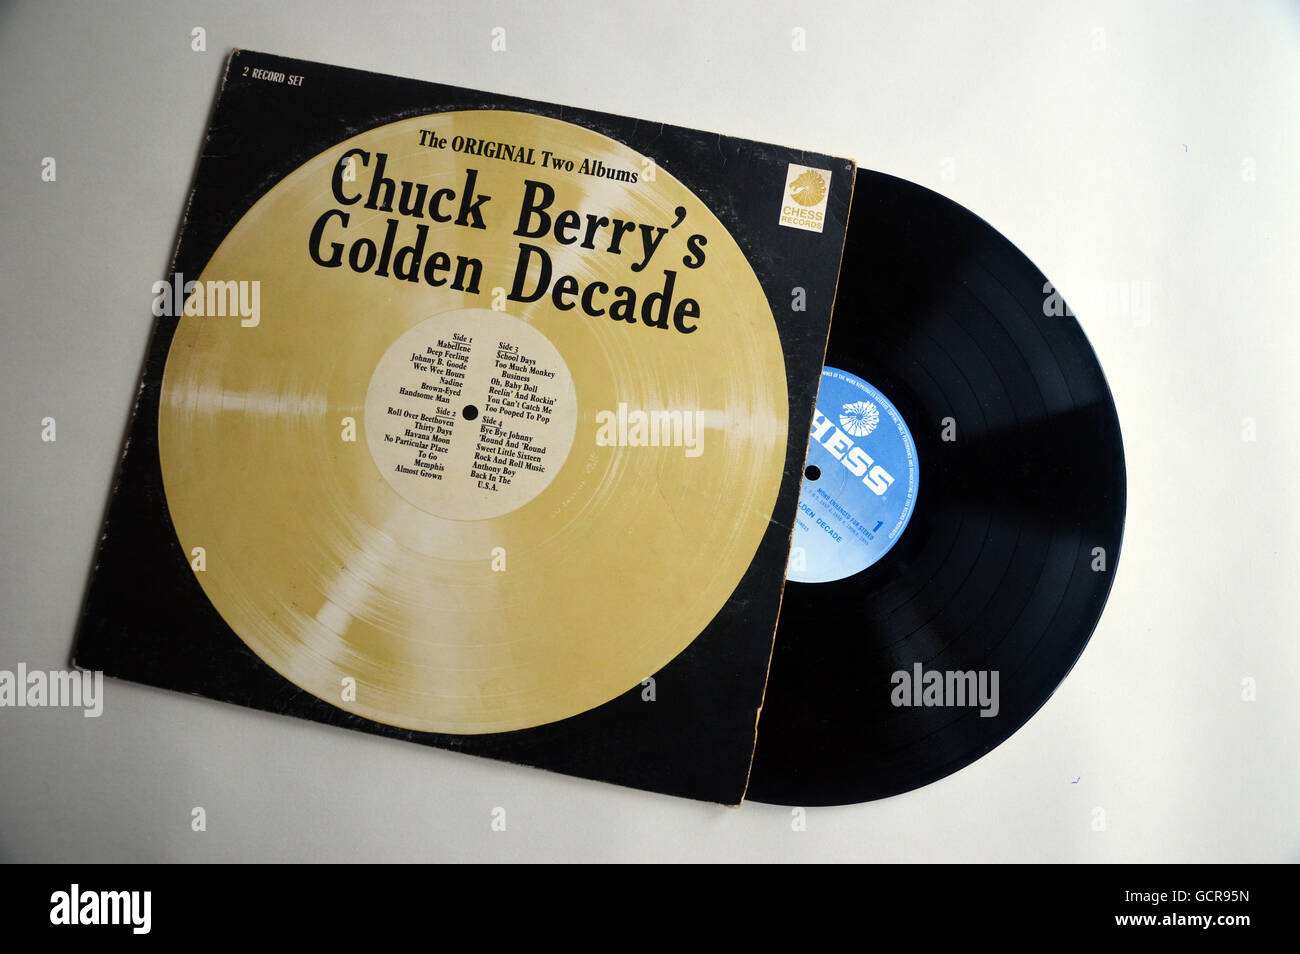 Chuck Berry's Golden Decade Double Record Album Cover by Chess Records. Stock Photo